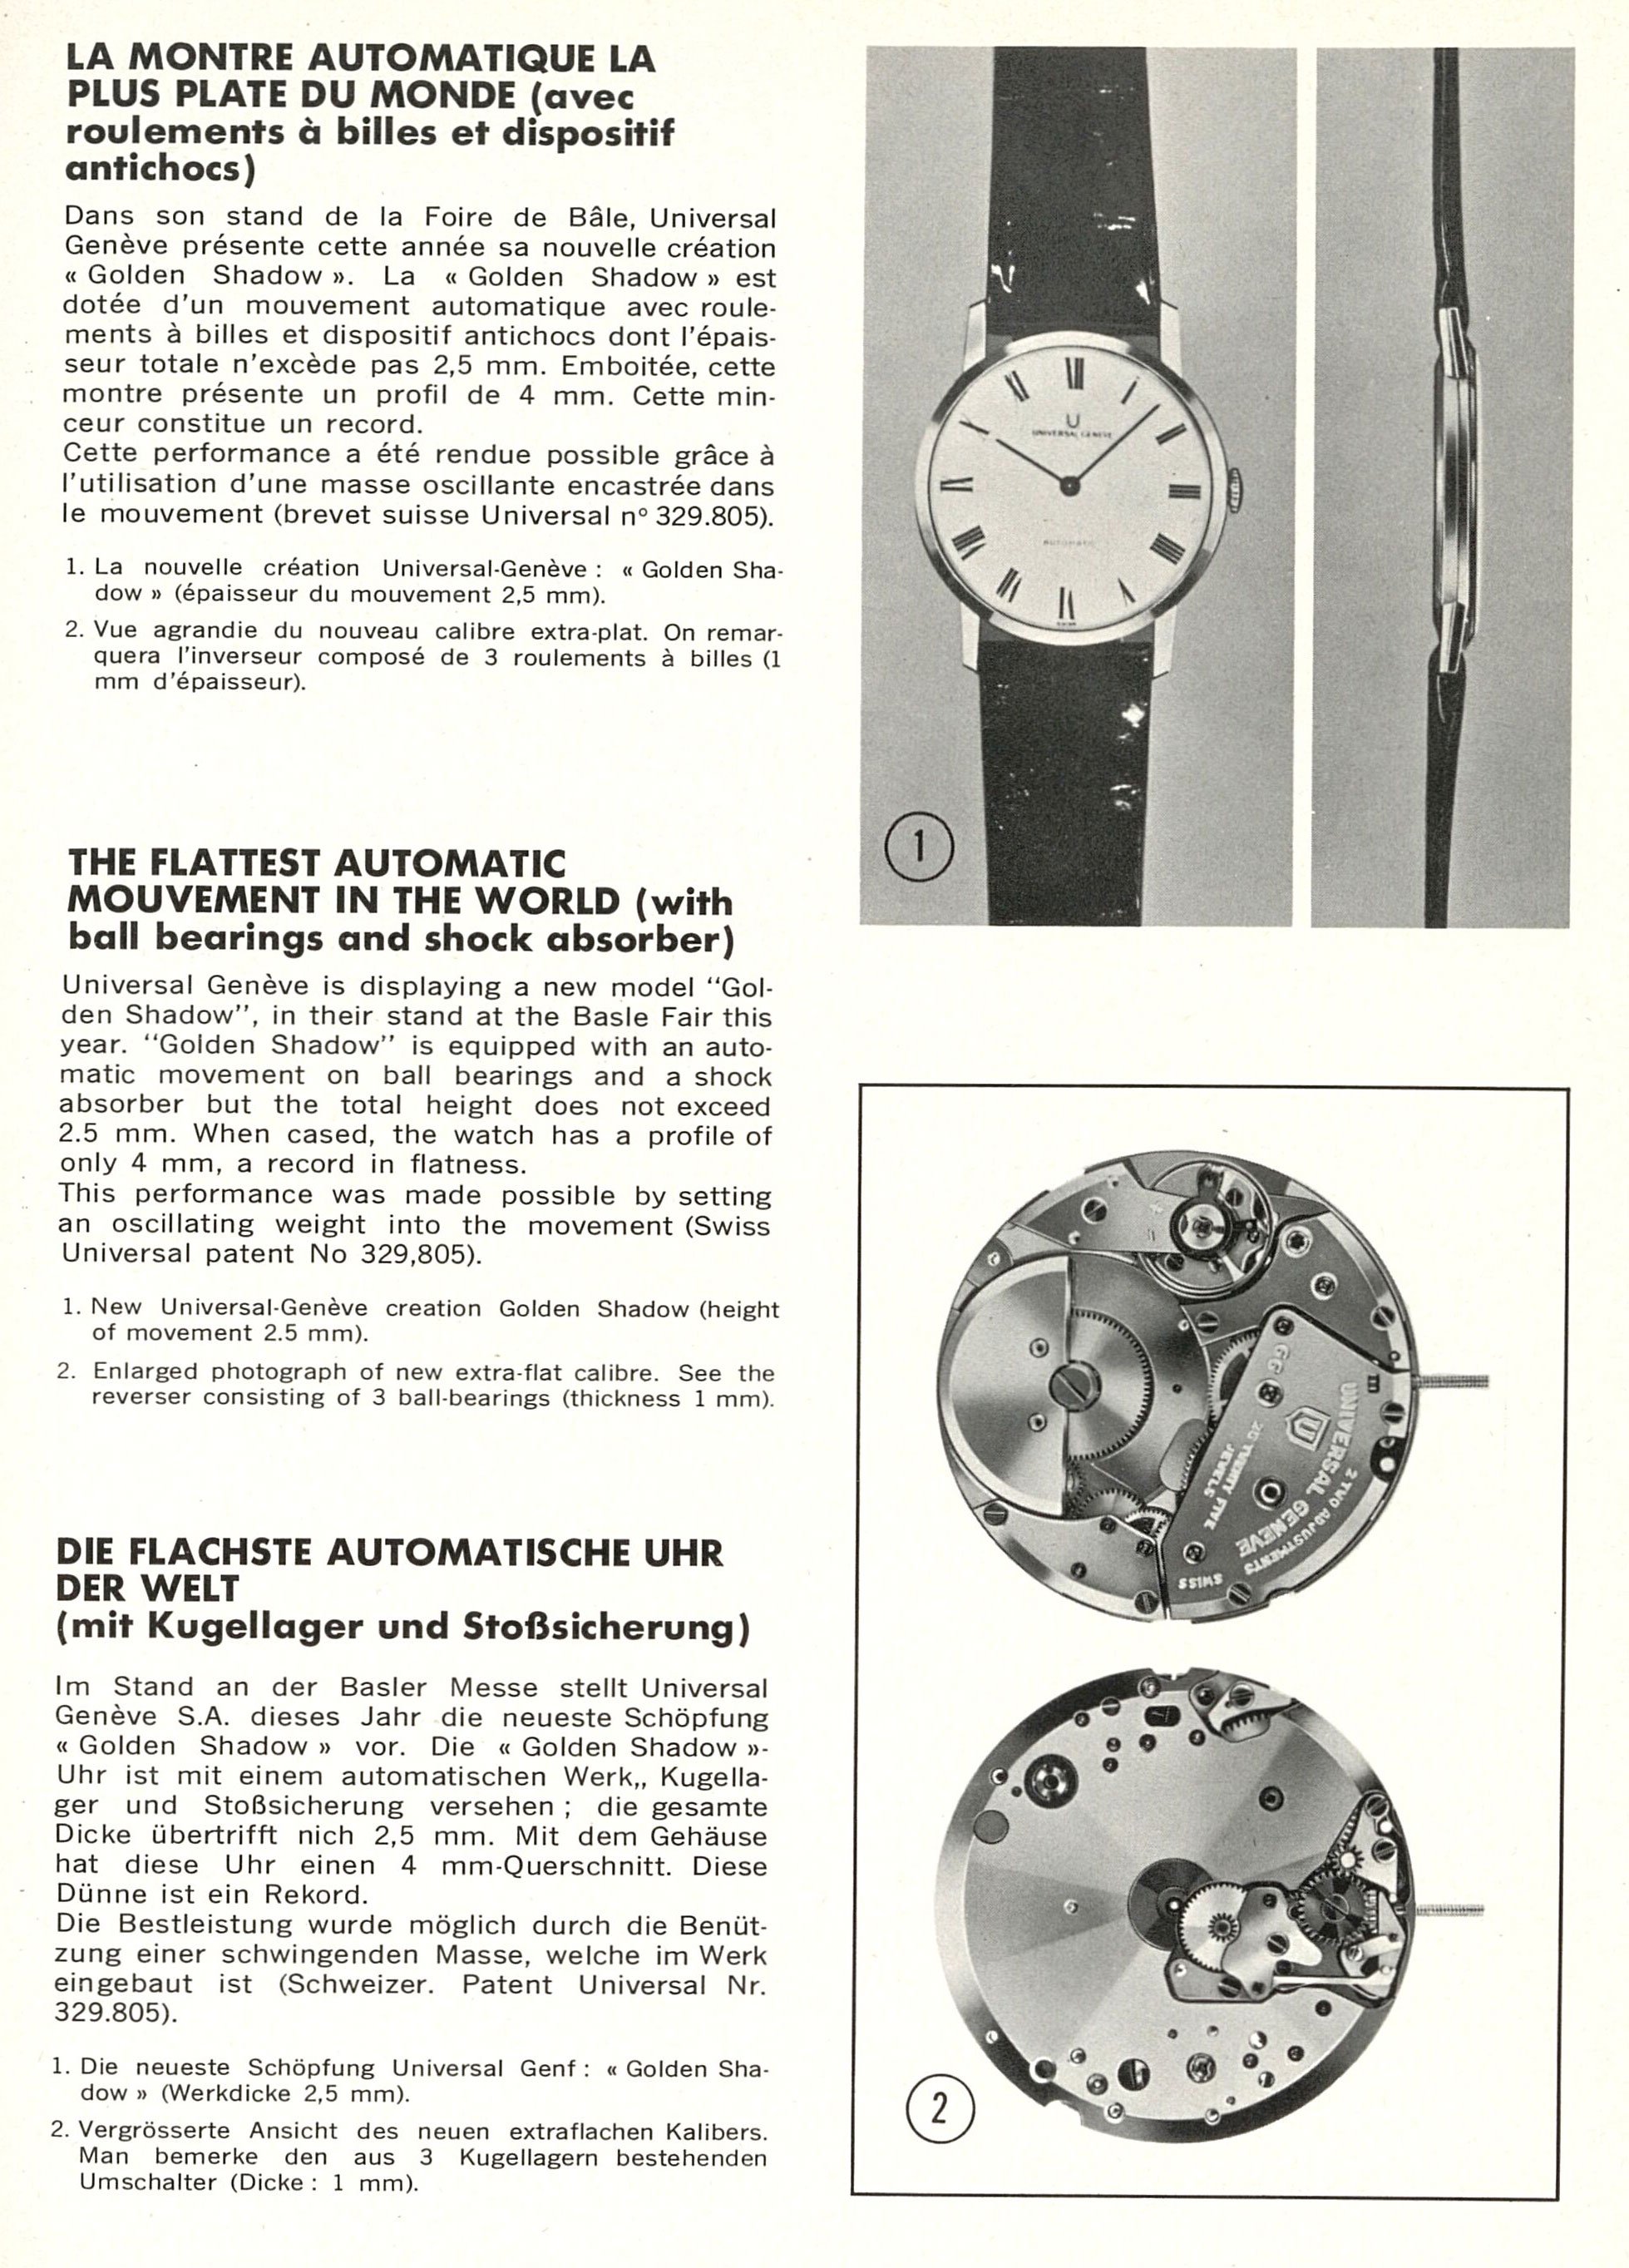 09_Universal Geneve advertising for the Golden Shadow watch published in Europa Star in 1966.jpg